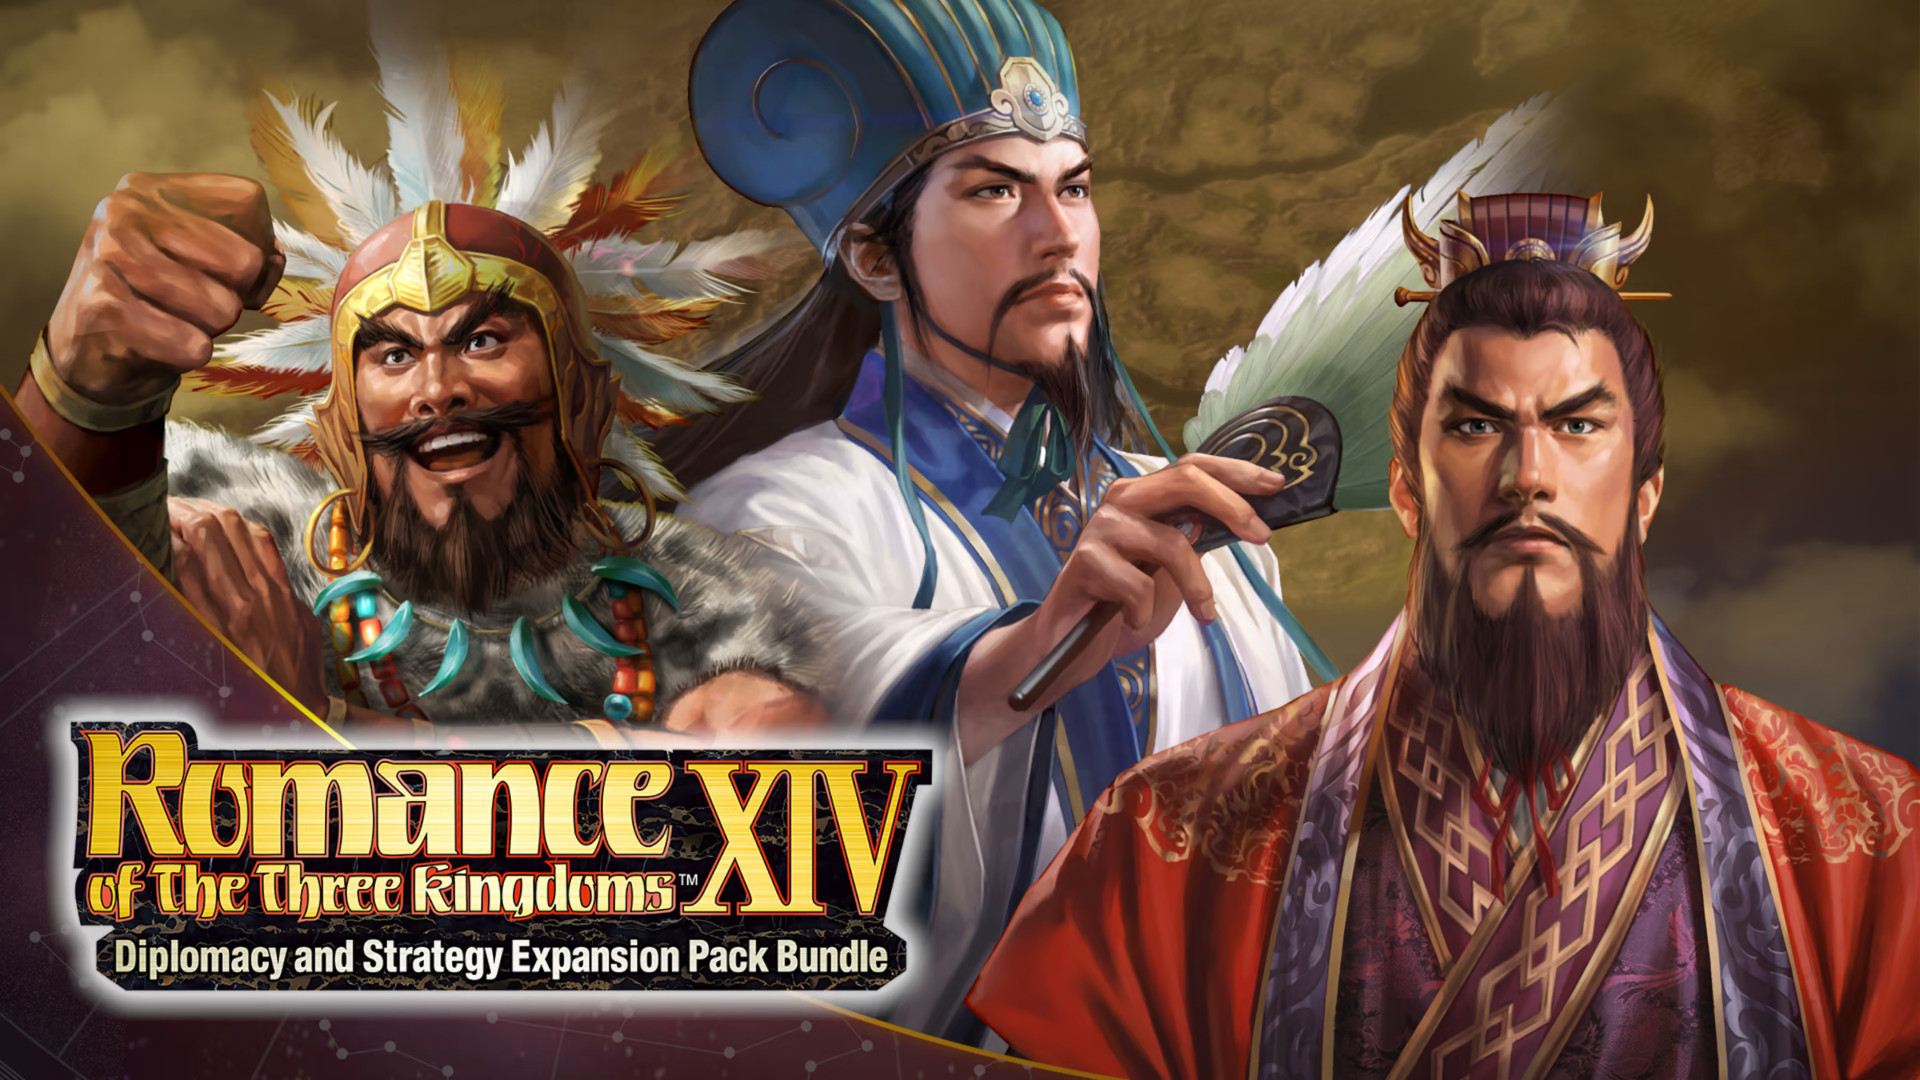 Romance of the Three Kingdoms XIV - Diplomacy and Strategy Expansion Pack DLC Steam CD key 39.55$